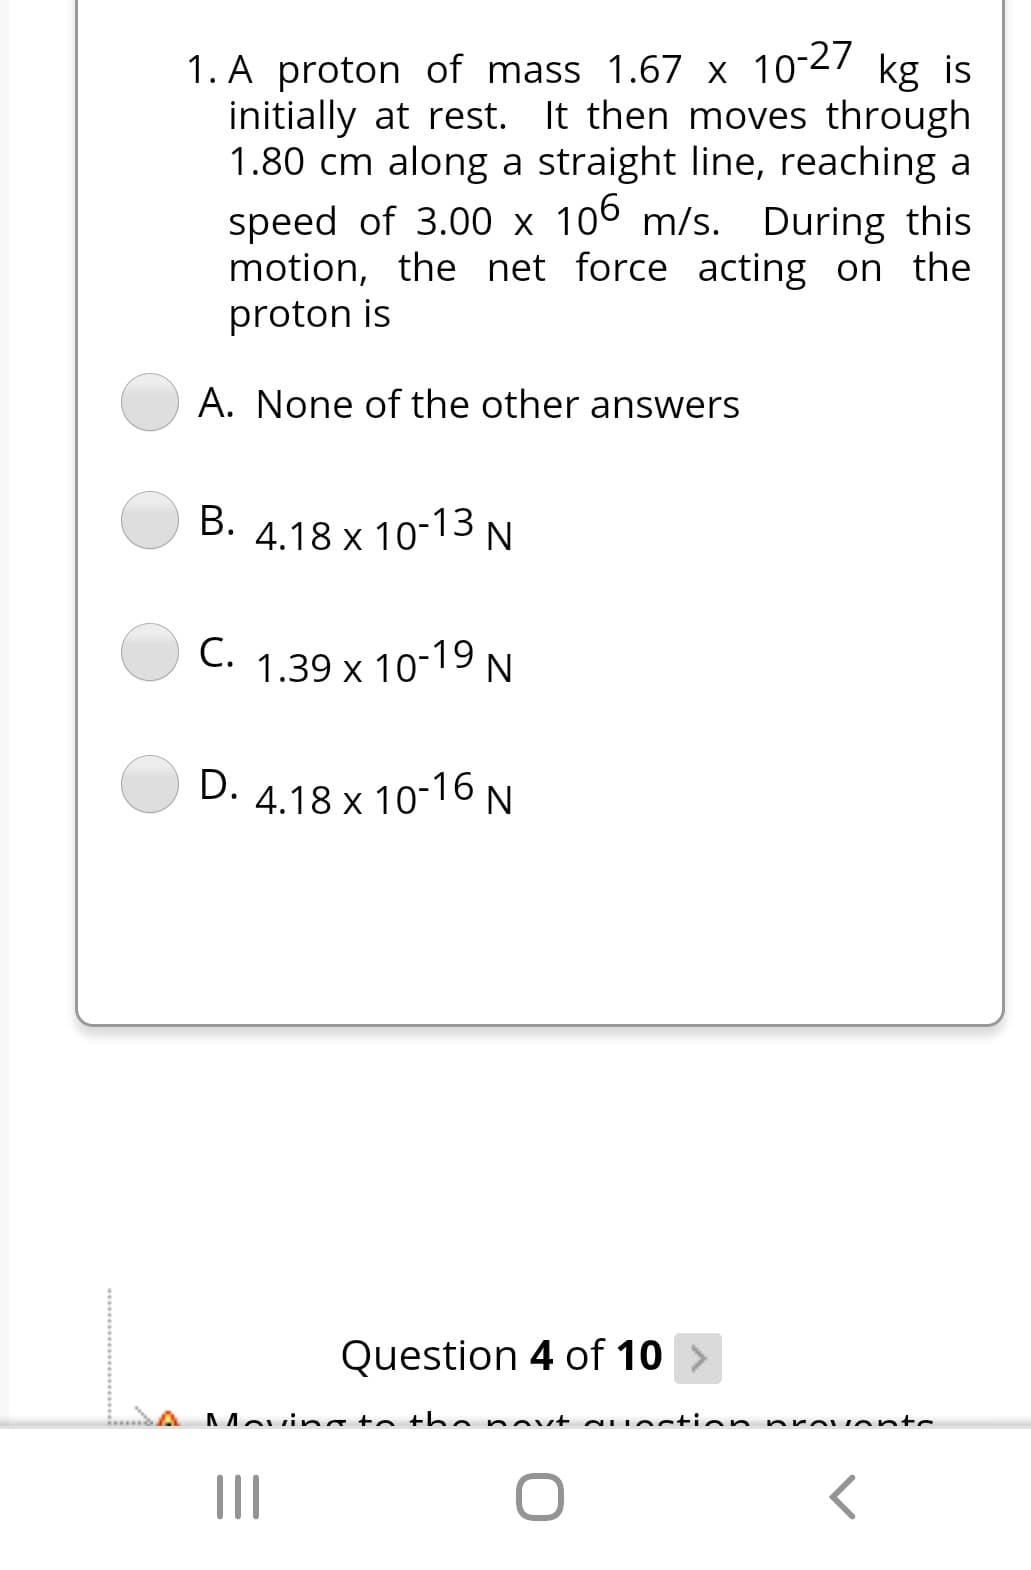 1. A proton of mass 1.67 x 10-27 kg is
initially at rest. It then moves through
1.80 cm along a straight line, reaching a
speed of 3.00 x 106 m/s. During this
motion, the net force acting on the
proton is
A. None of the other answers
B. 4.18 x 10-13 N
С.
C. 1.39 x 10-19 N
D. 4.18 x 10-16 N
Question 4 of 10
A
AMovina to th enovt NUstio n preu ents
